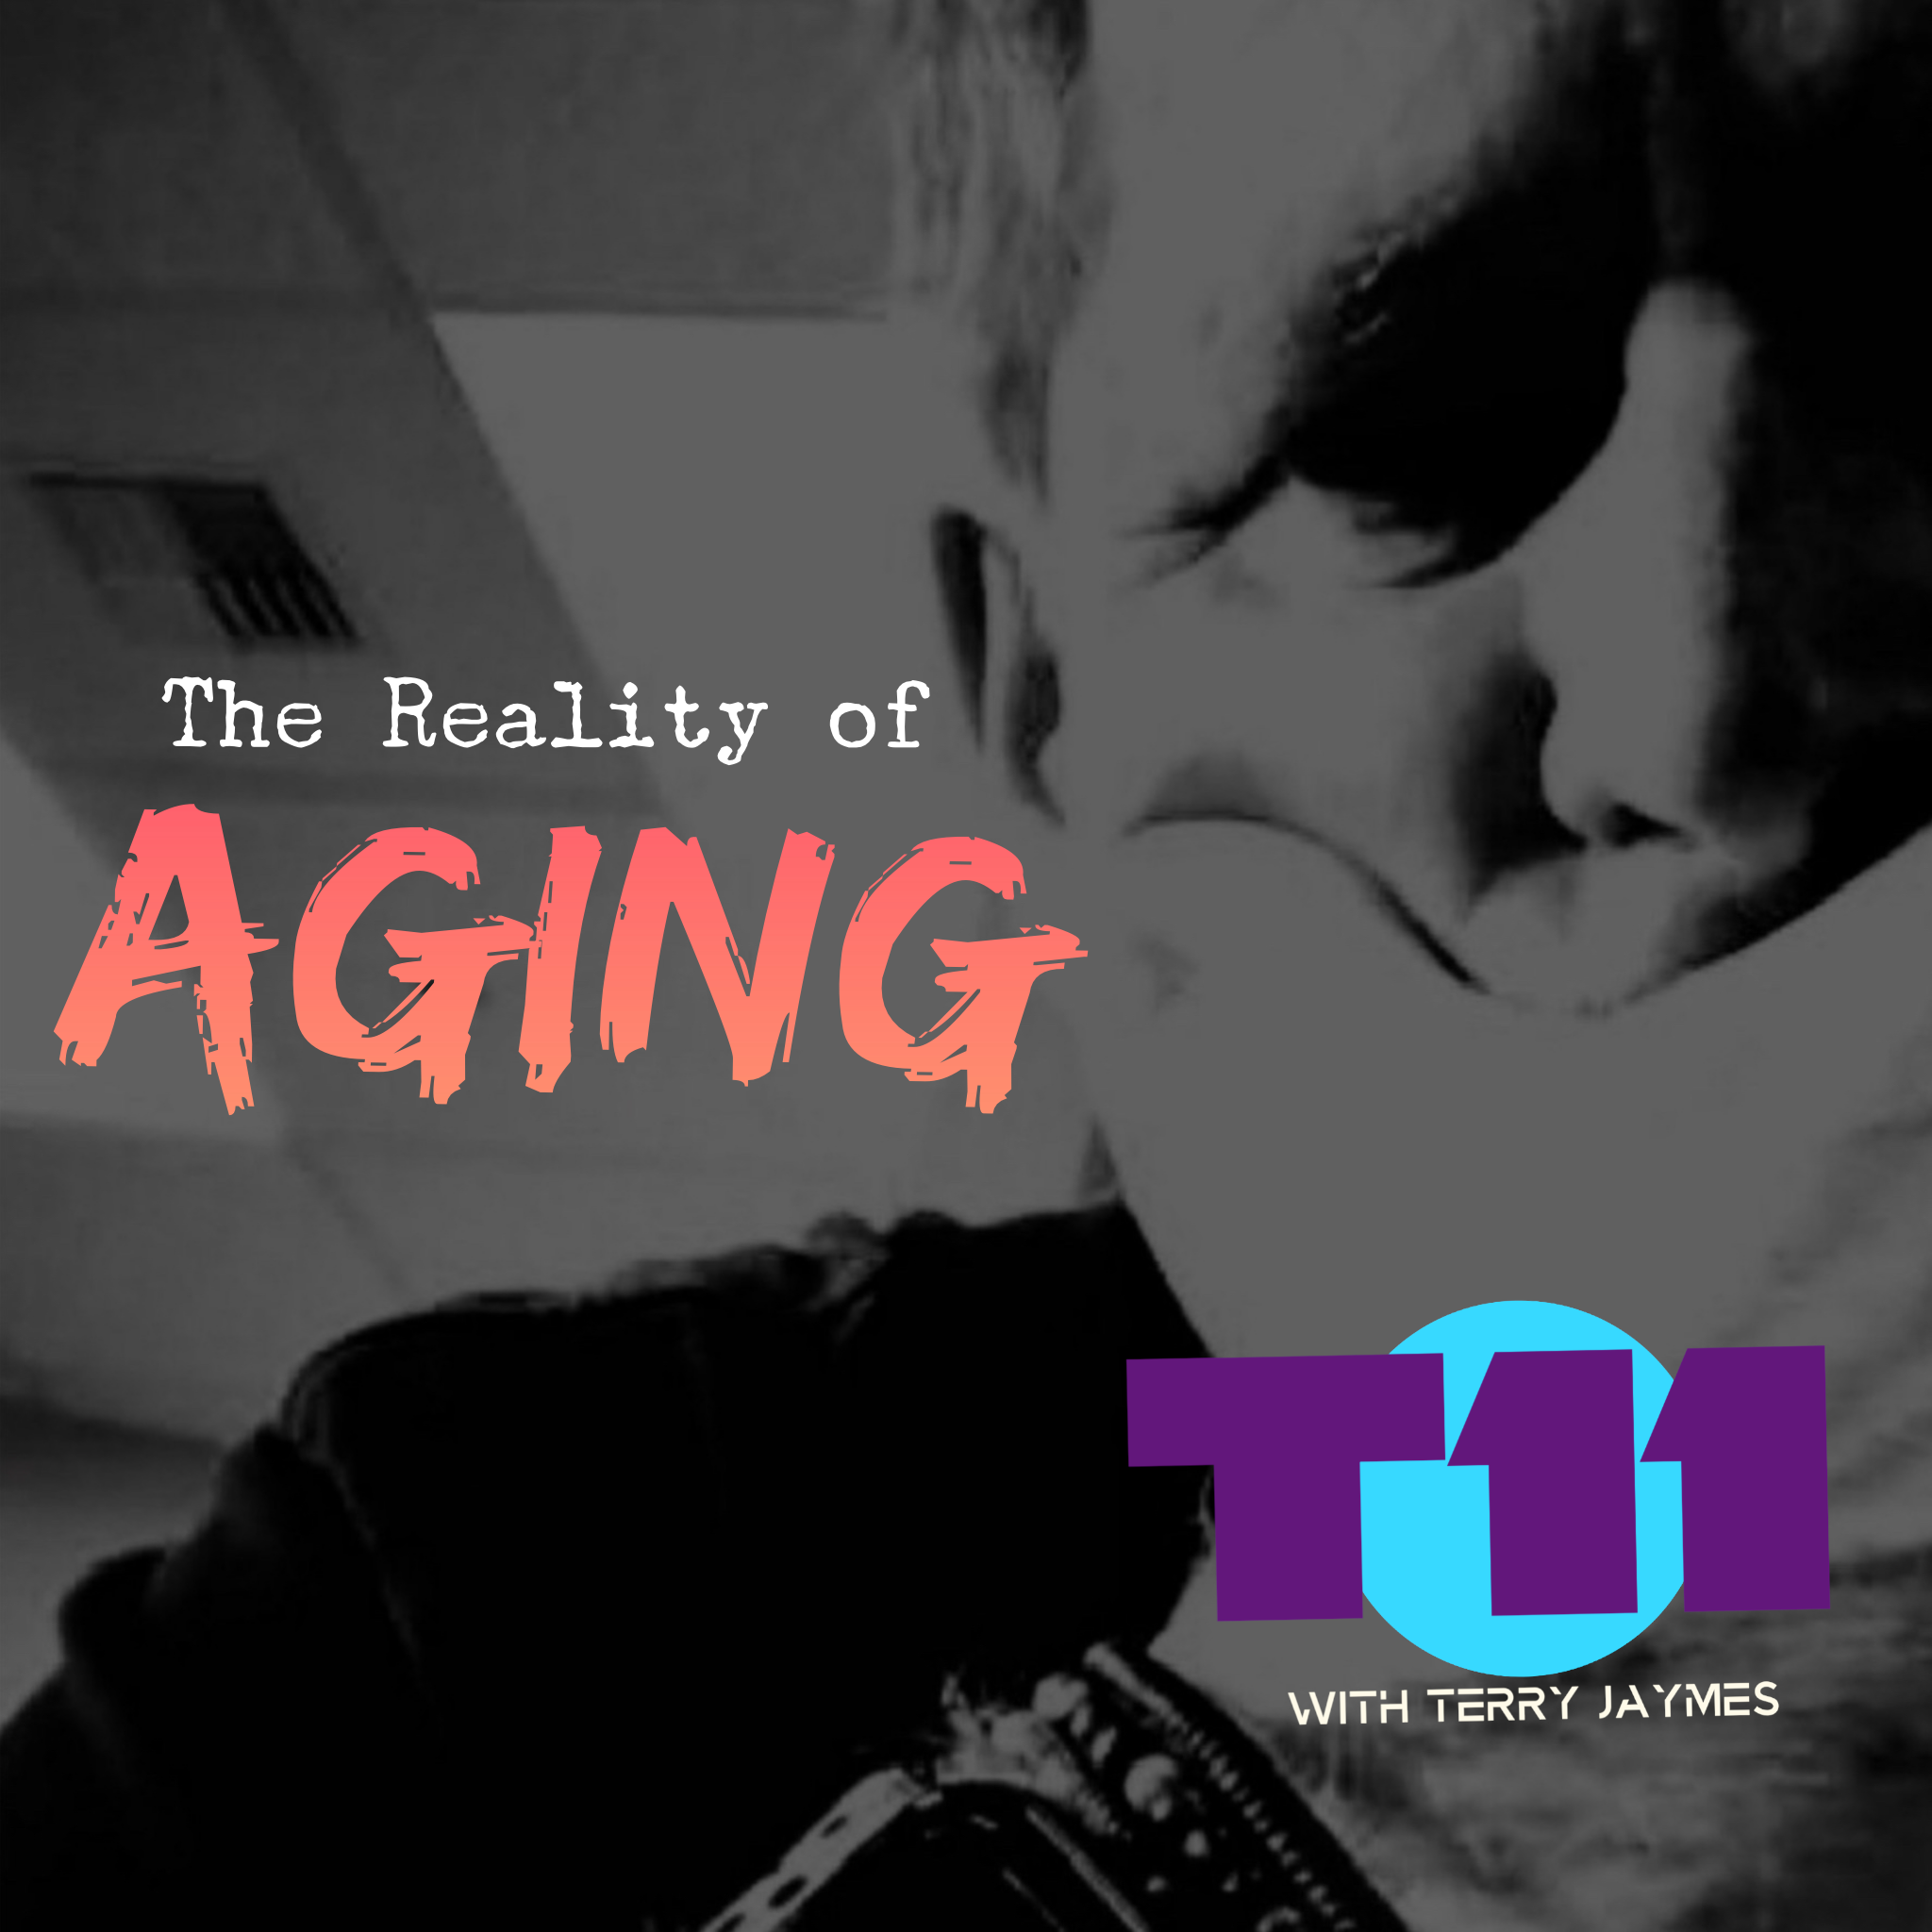 THE REALITY OF AGING